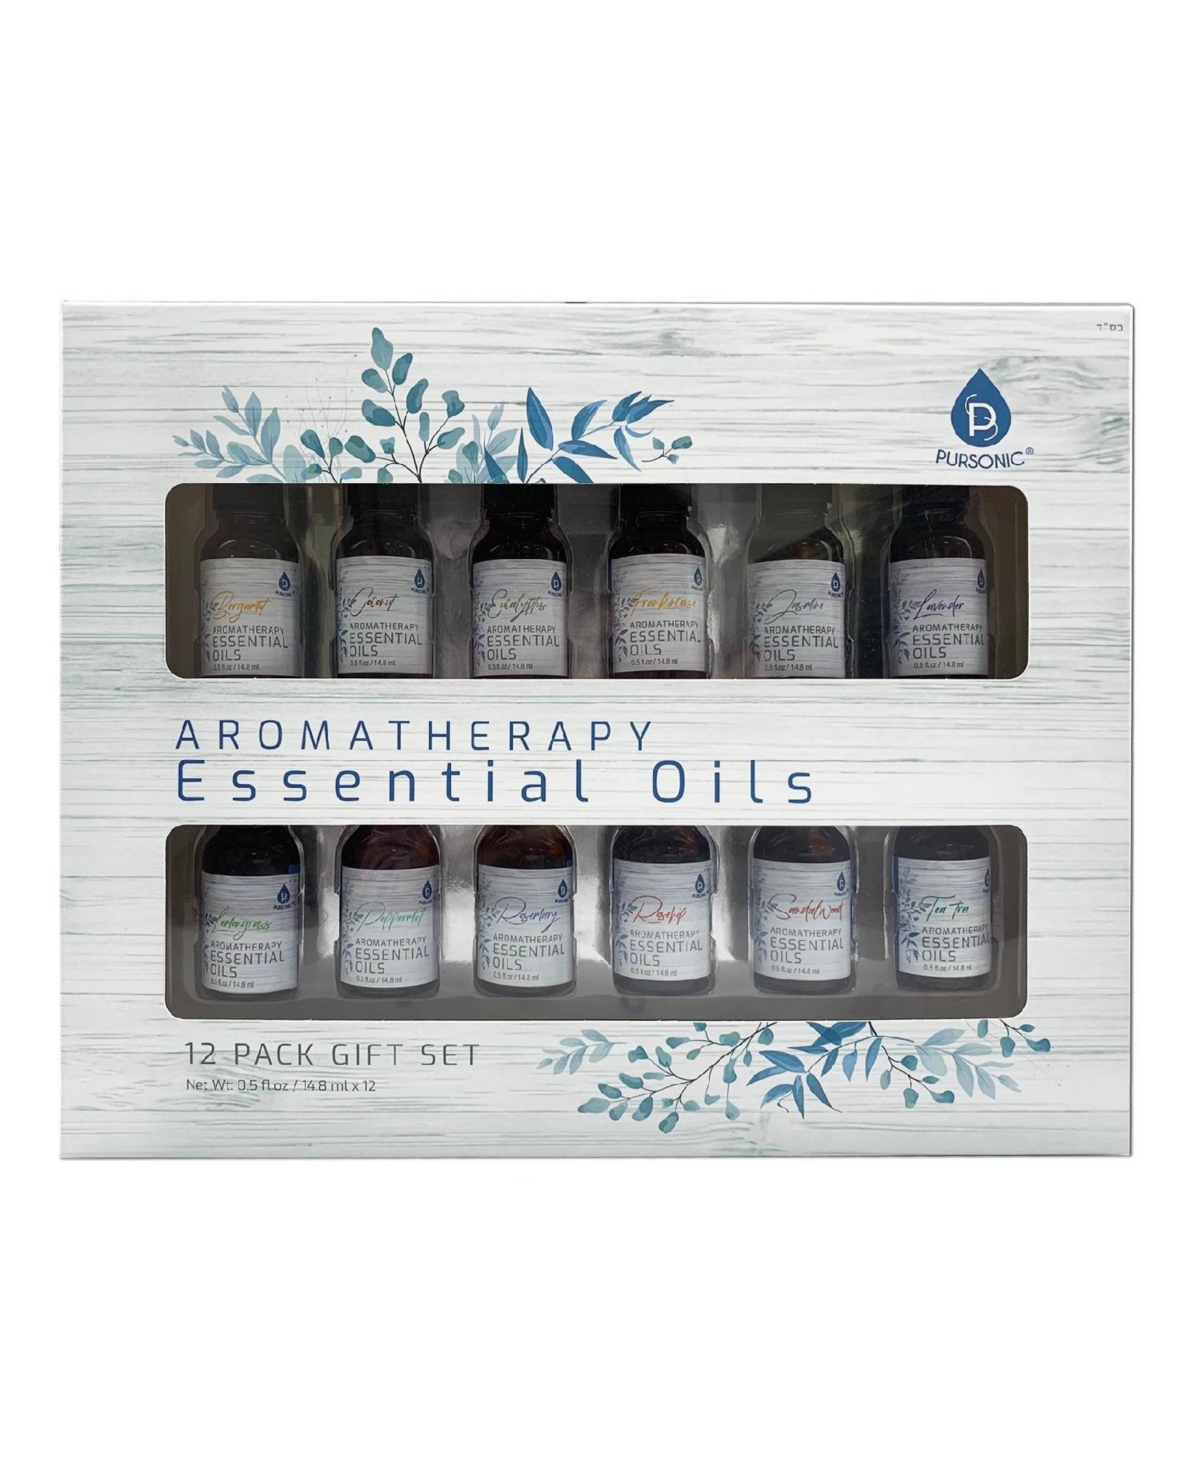 12 Pack of Aromatherapy Essential Oils - Natural